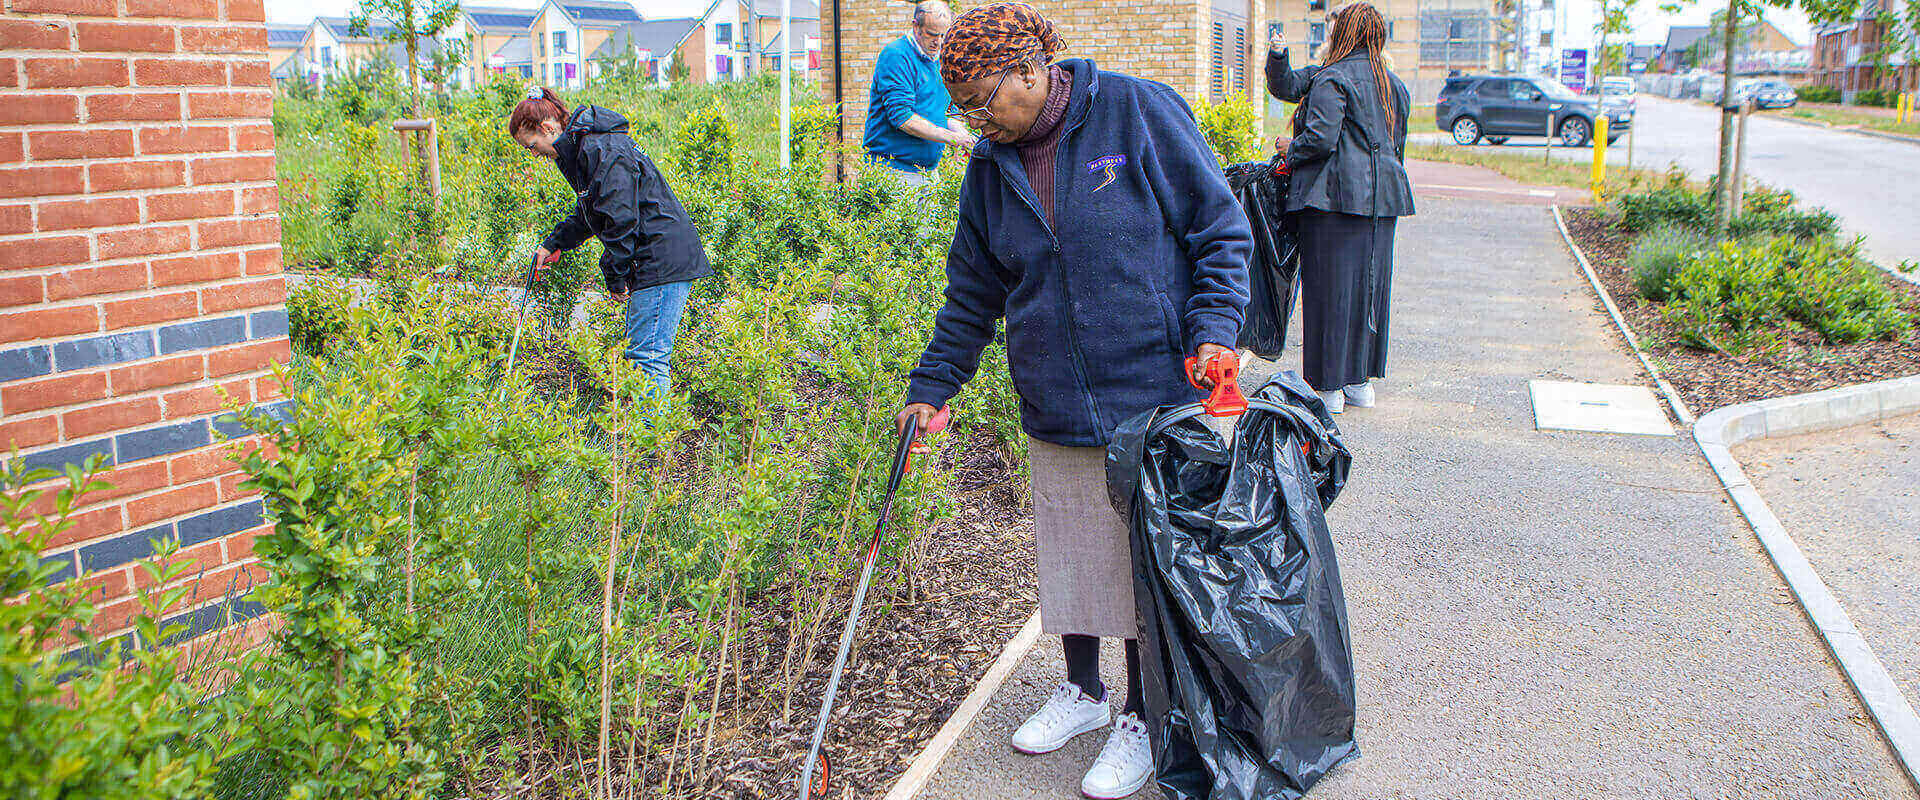 People litter picking local grounds